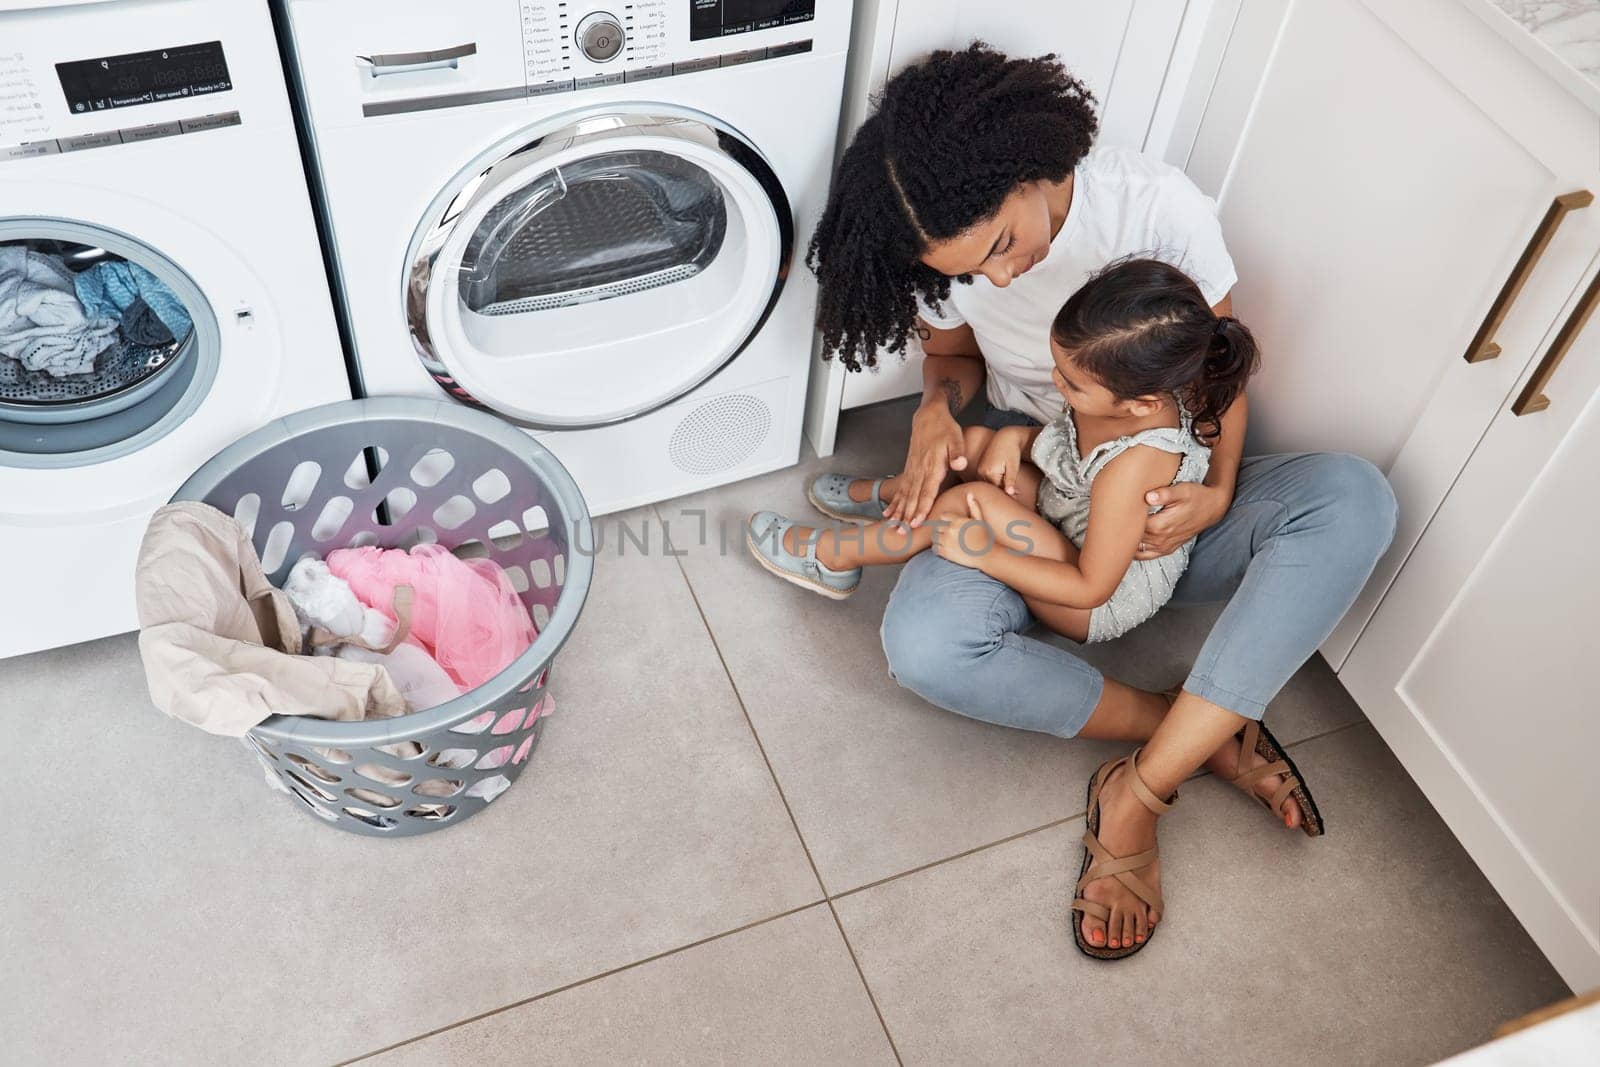 Mom, girl child and hug by washing machine on floor for cleaning, bonding and care in quality time at house. Laundry, mother and daughter with happiness, love and embrace in family home from top view.